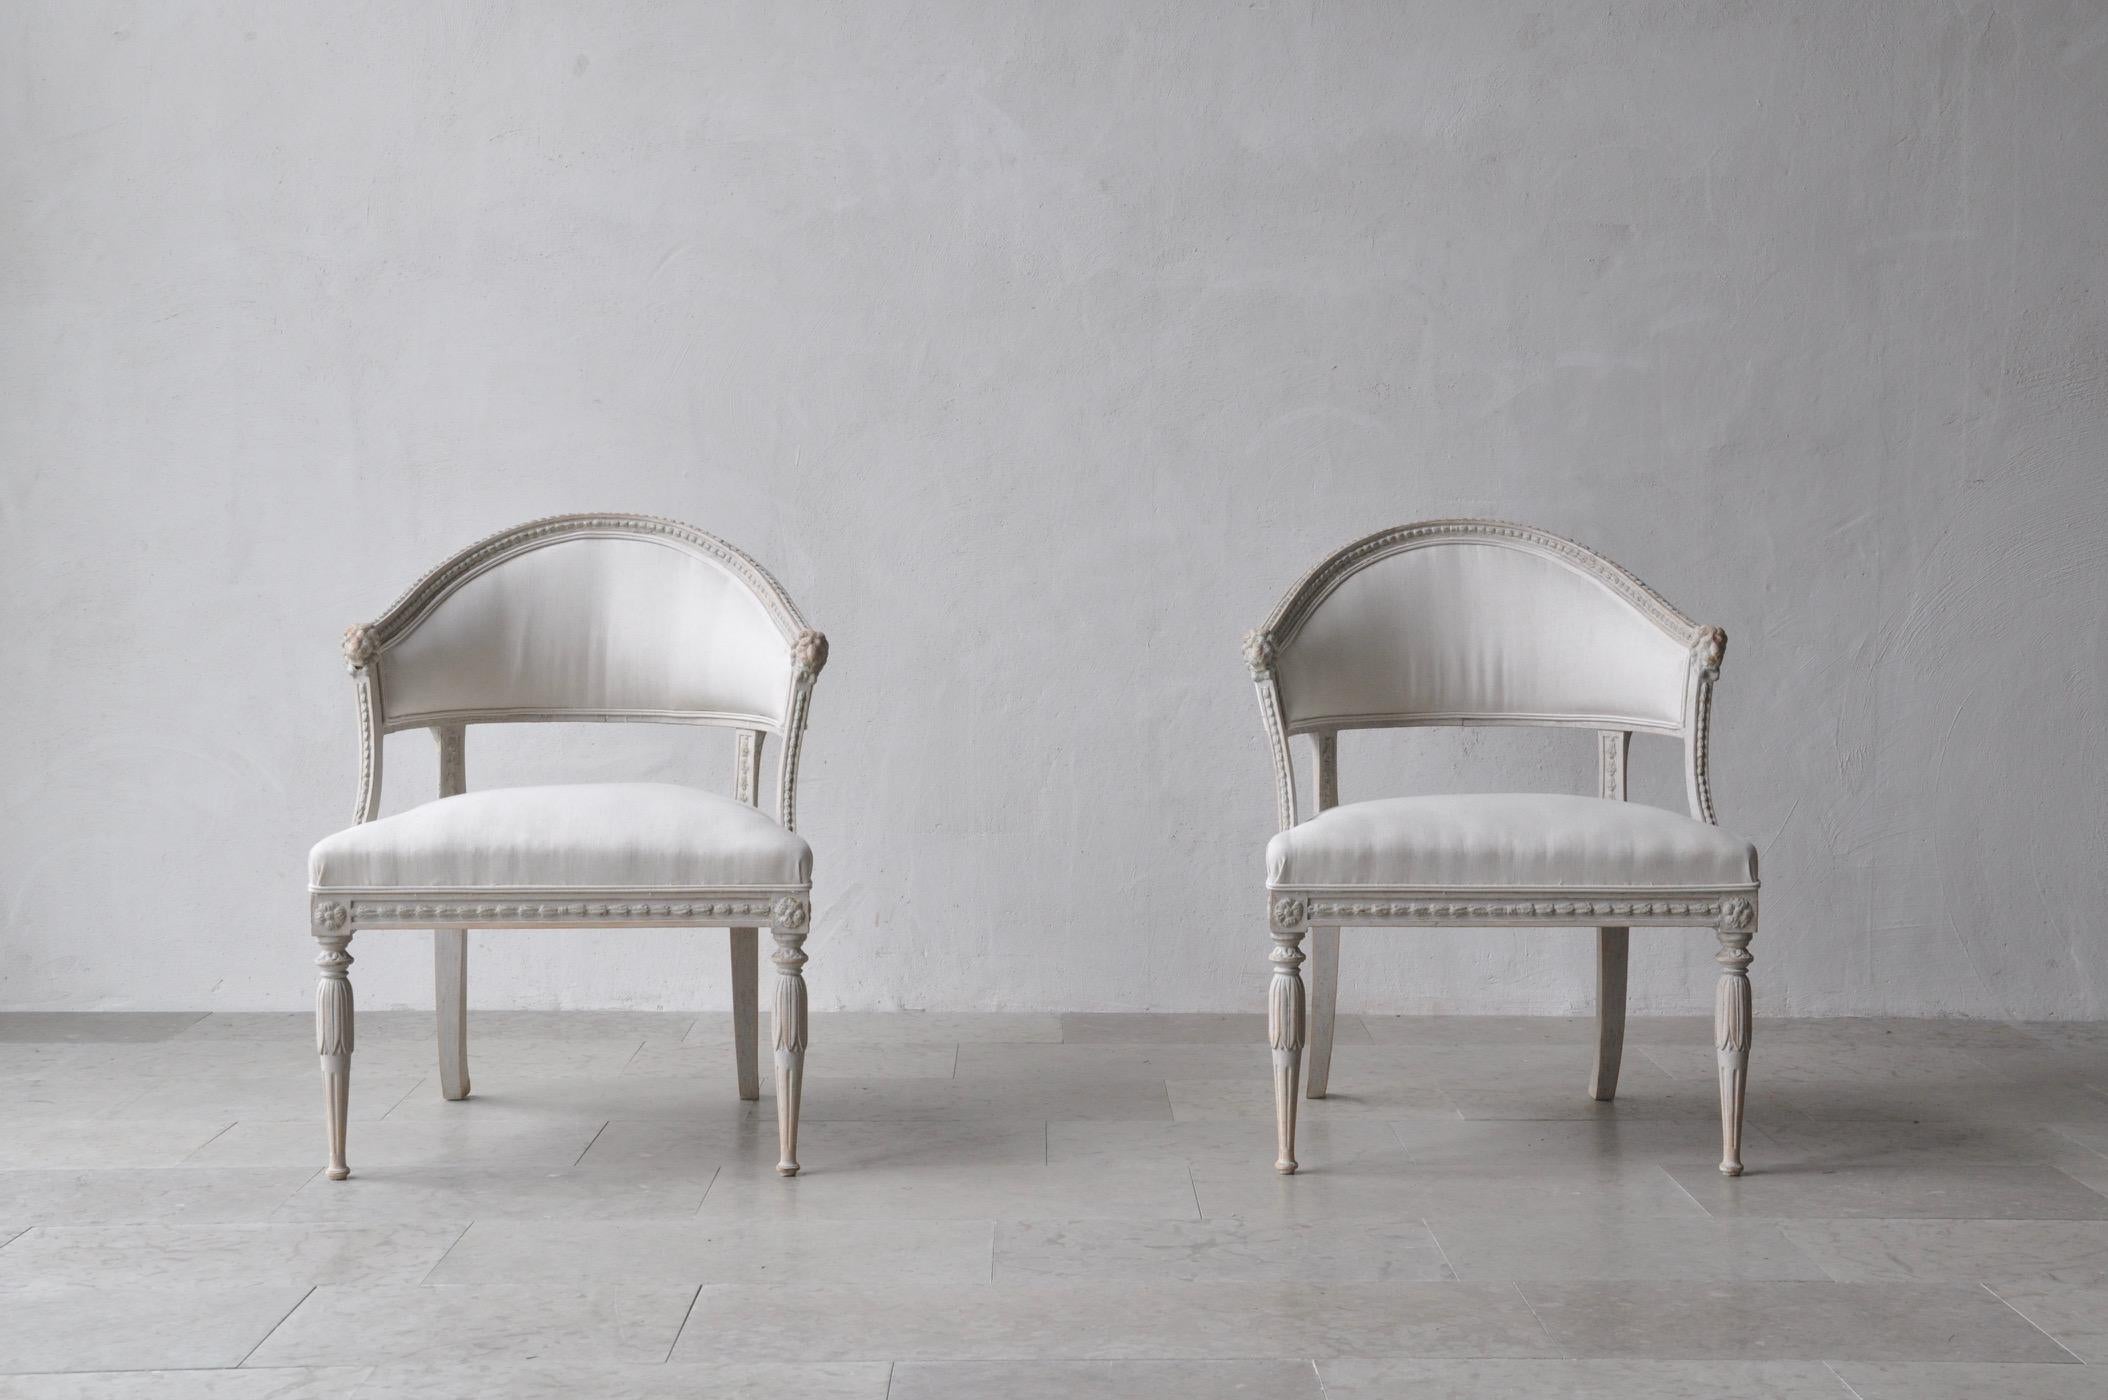 A Swedish Gustavian style pair of antique klismos armchairs. These stunning chairs have barrel backs with cravings of lions' heads. The seat frame features beautiful carving detail and the corner posts are adorned with rosettes. This pair has been